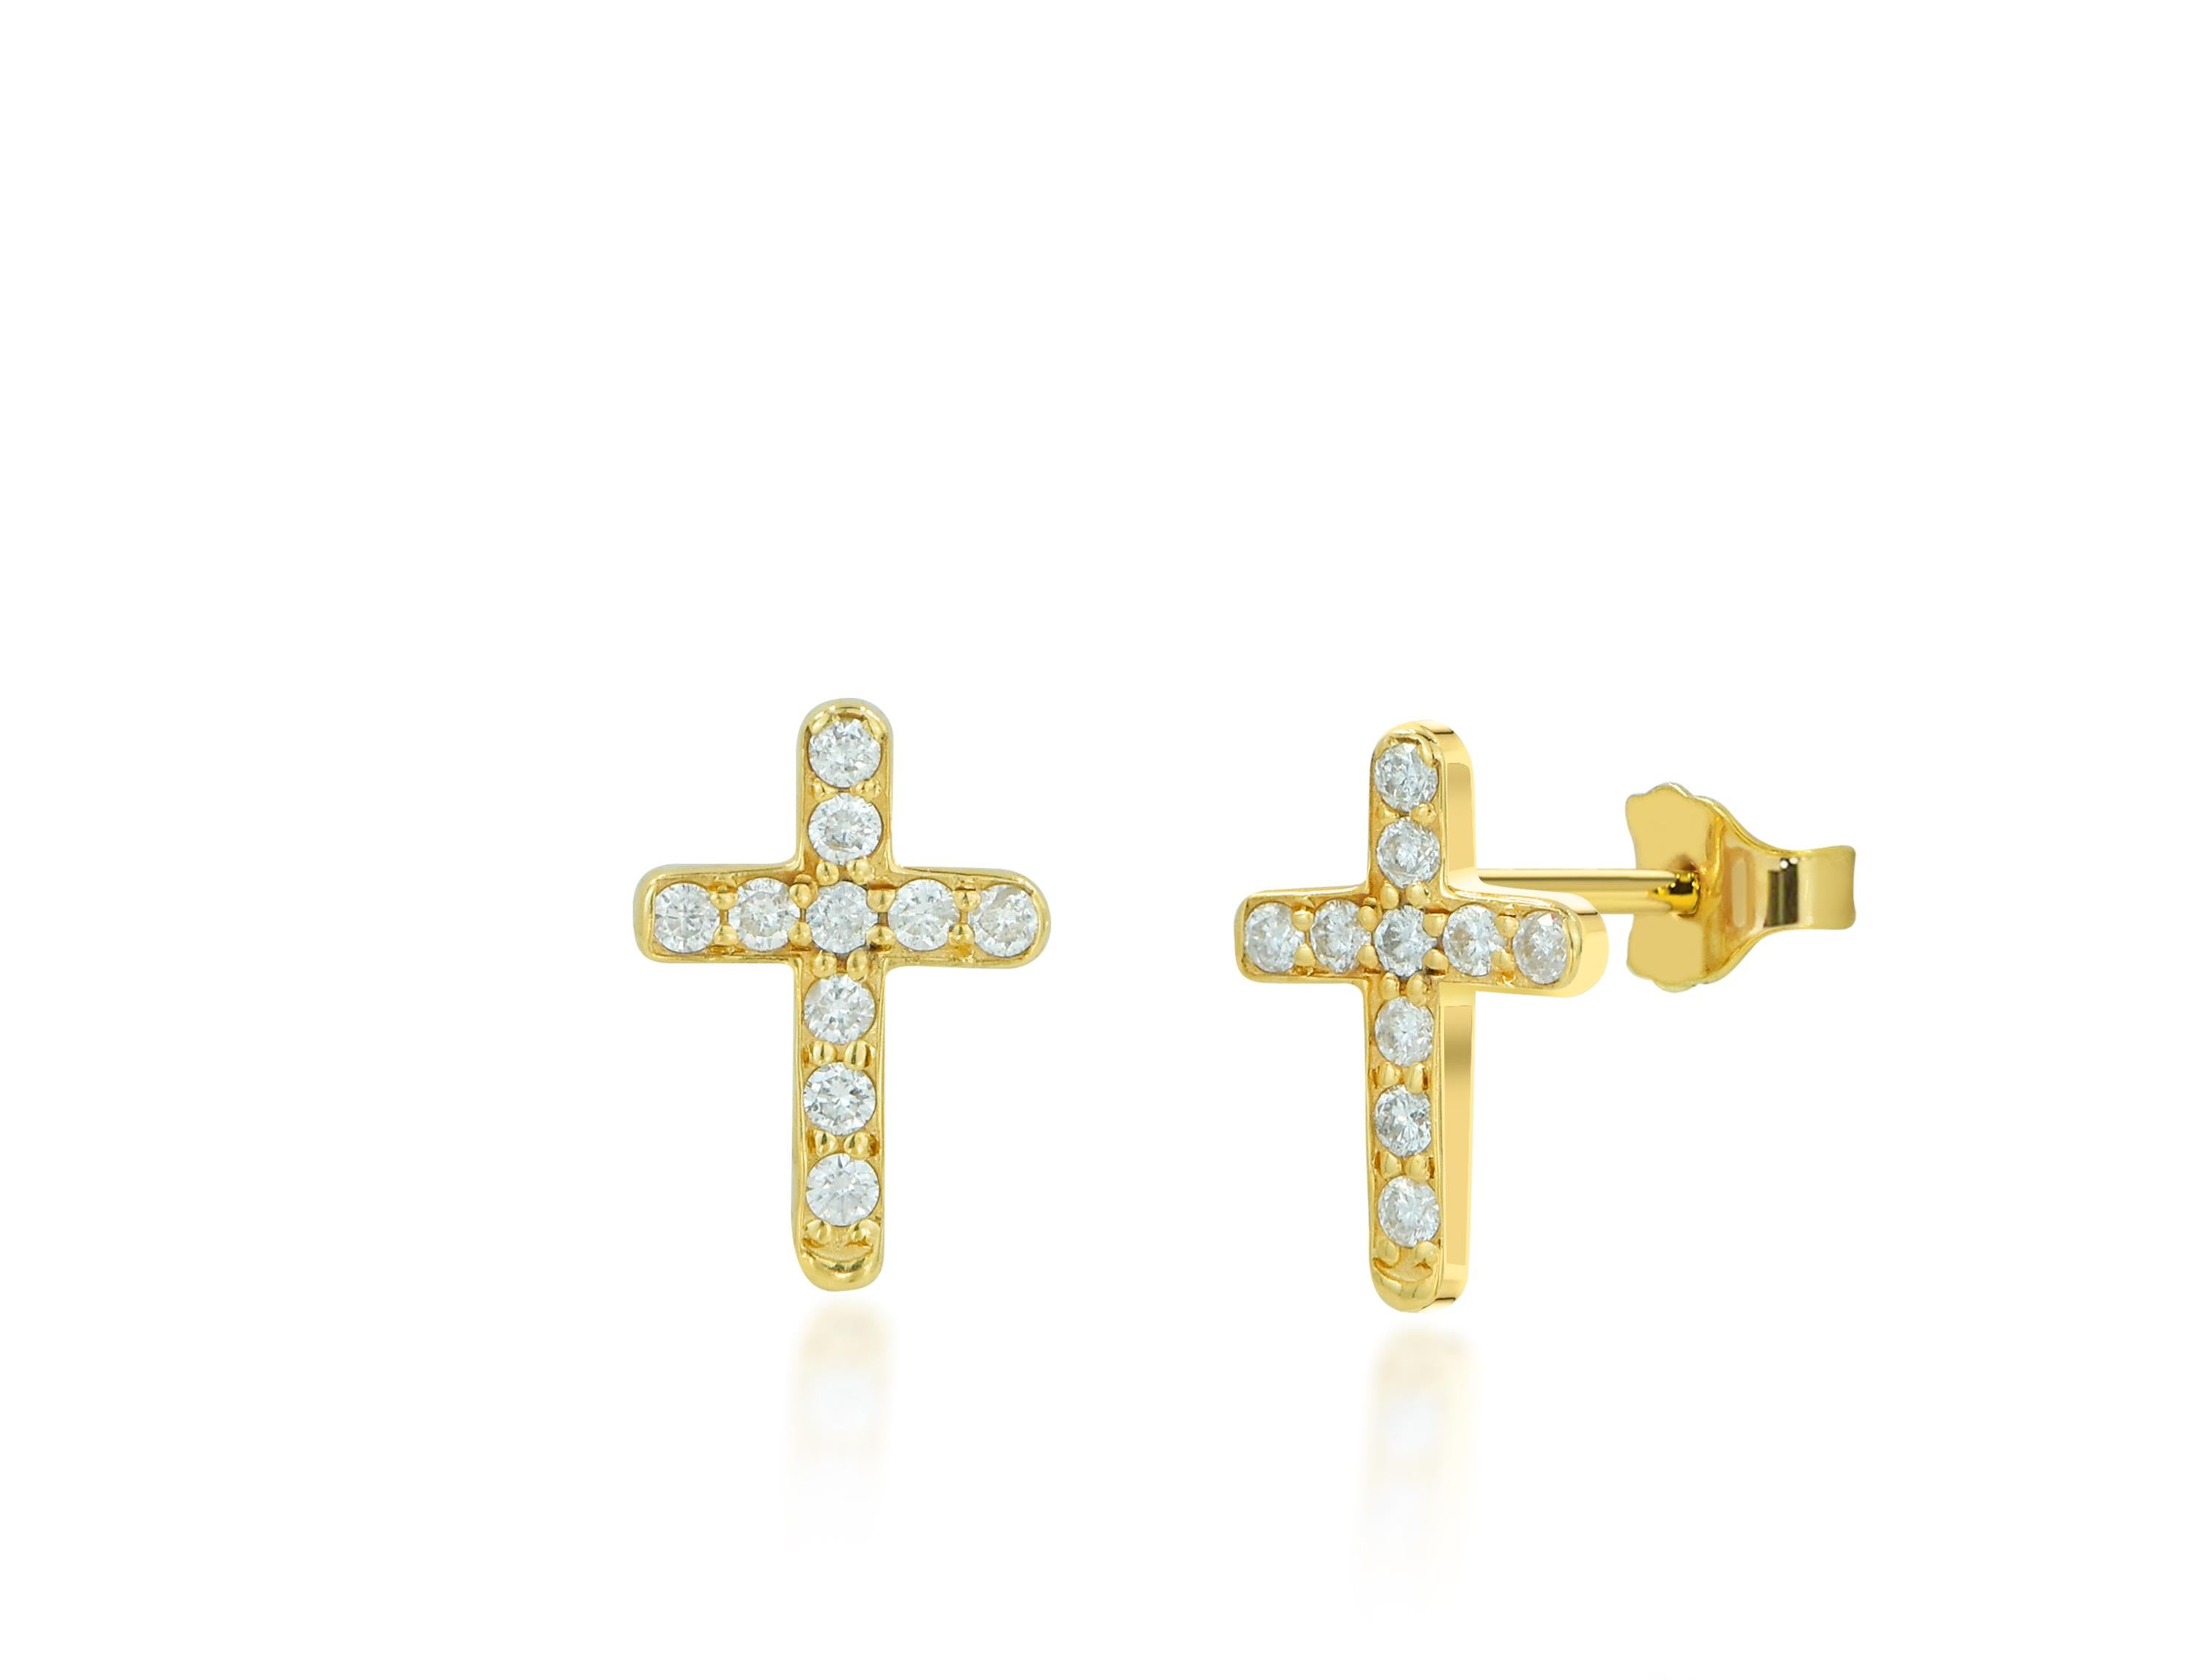 Diamond Cross Stud Earrings in 18k Rose Gold, Yellow Gold, White Gold.

These Dainty Stud Earrings are made of 18k solid gold featuring shiny brilliant round cut natural diamonds set by master setter in our studio. Simple but unique, elegant and